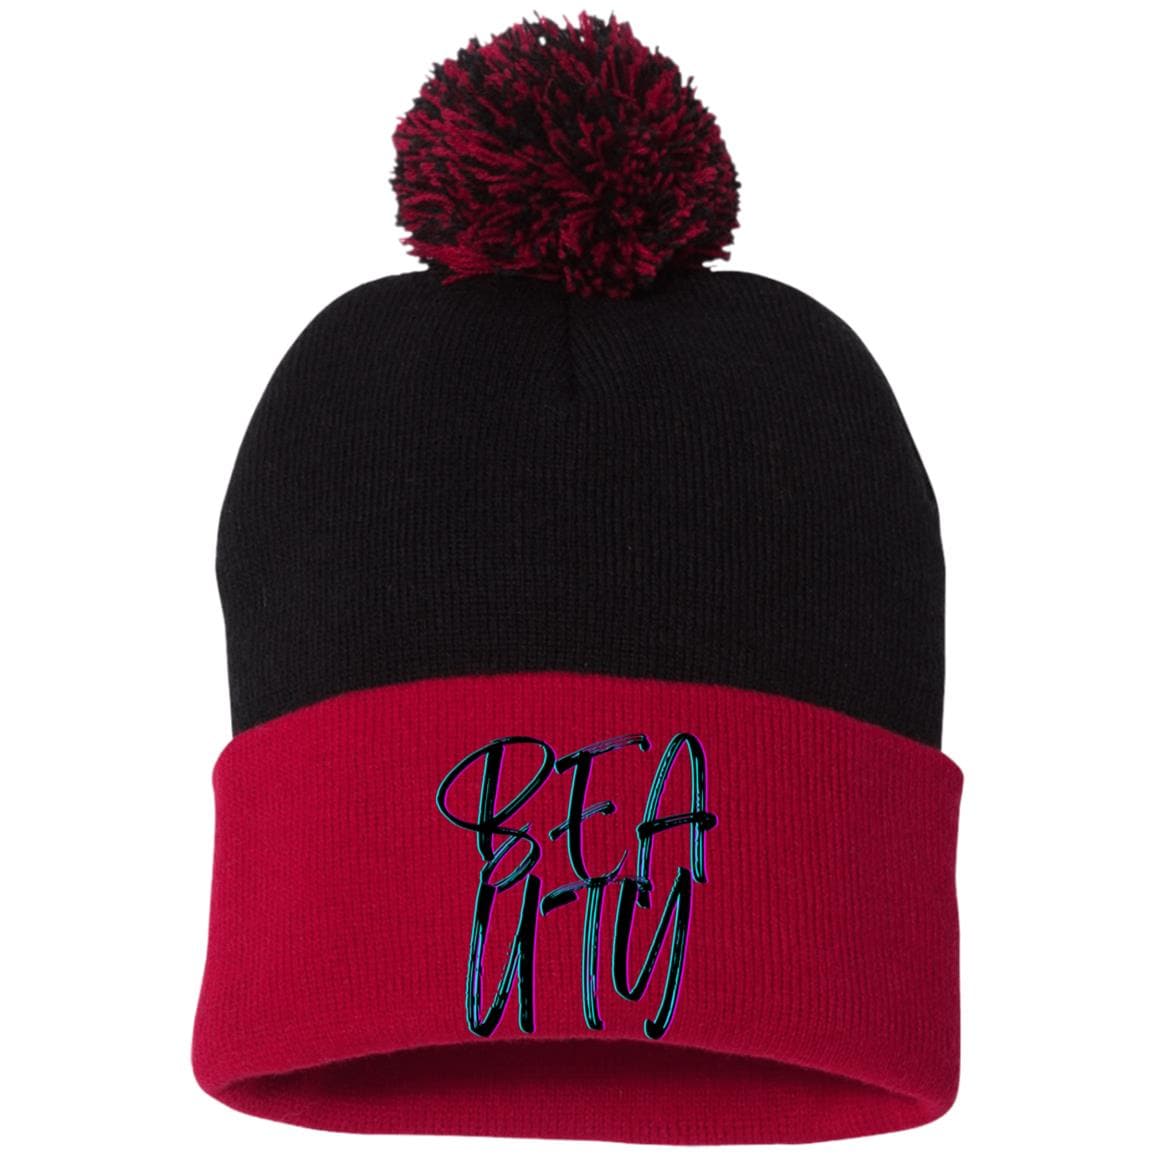 Red/Black One Size - Beauty Embroidered Pom Pom Knit Cap - Hats at TFC&H Co.